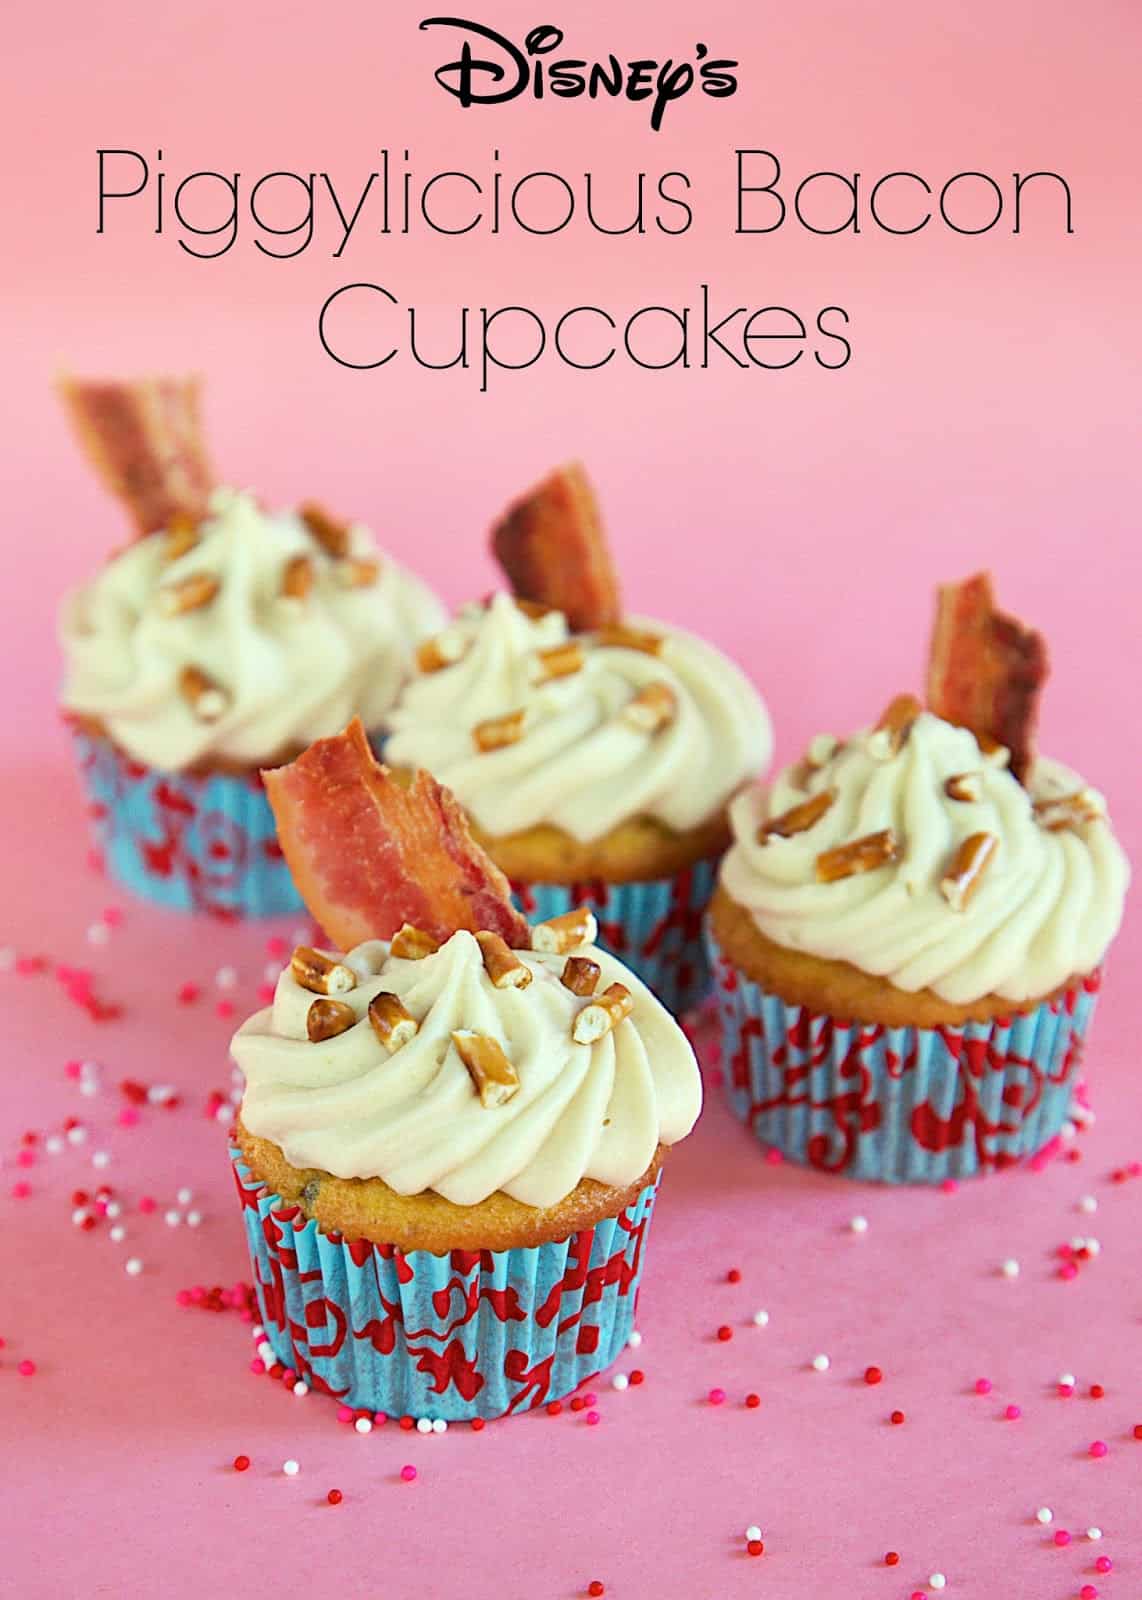 Disney's Piggylicious Bacon Cupcakes - cupcakes baked with bacon fat and packed full of bacon. Topped with a maple cream cheese frosting! OMG delicious! 